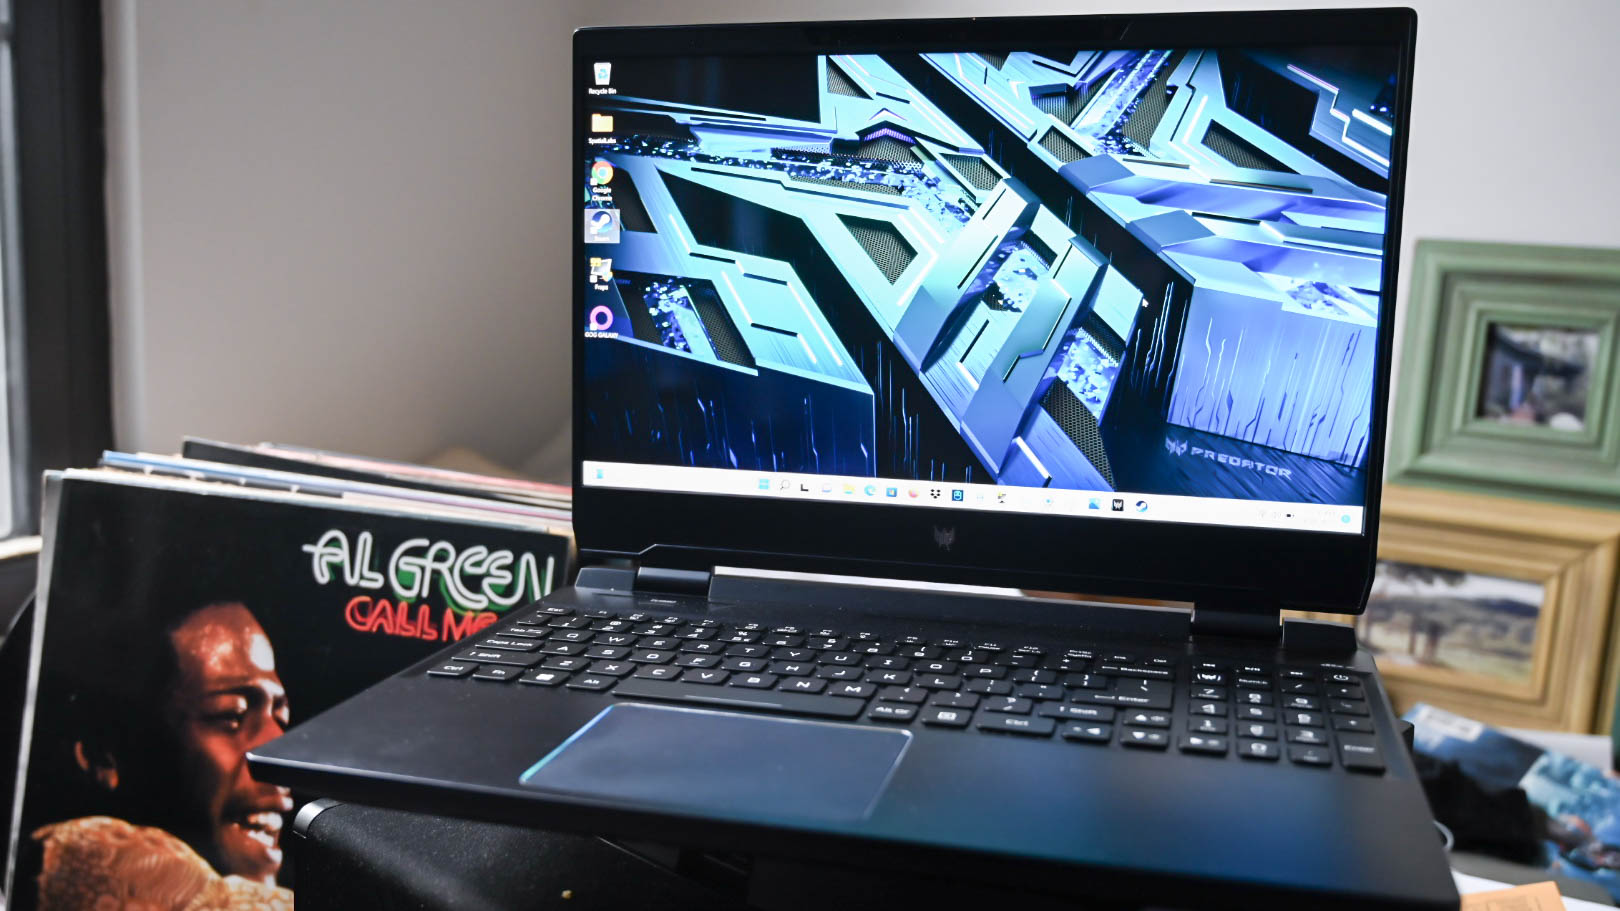 Acer Predator Helios 300 review: A well-rounded gaming laptop at a great  price